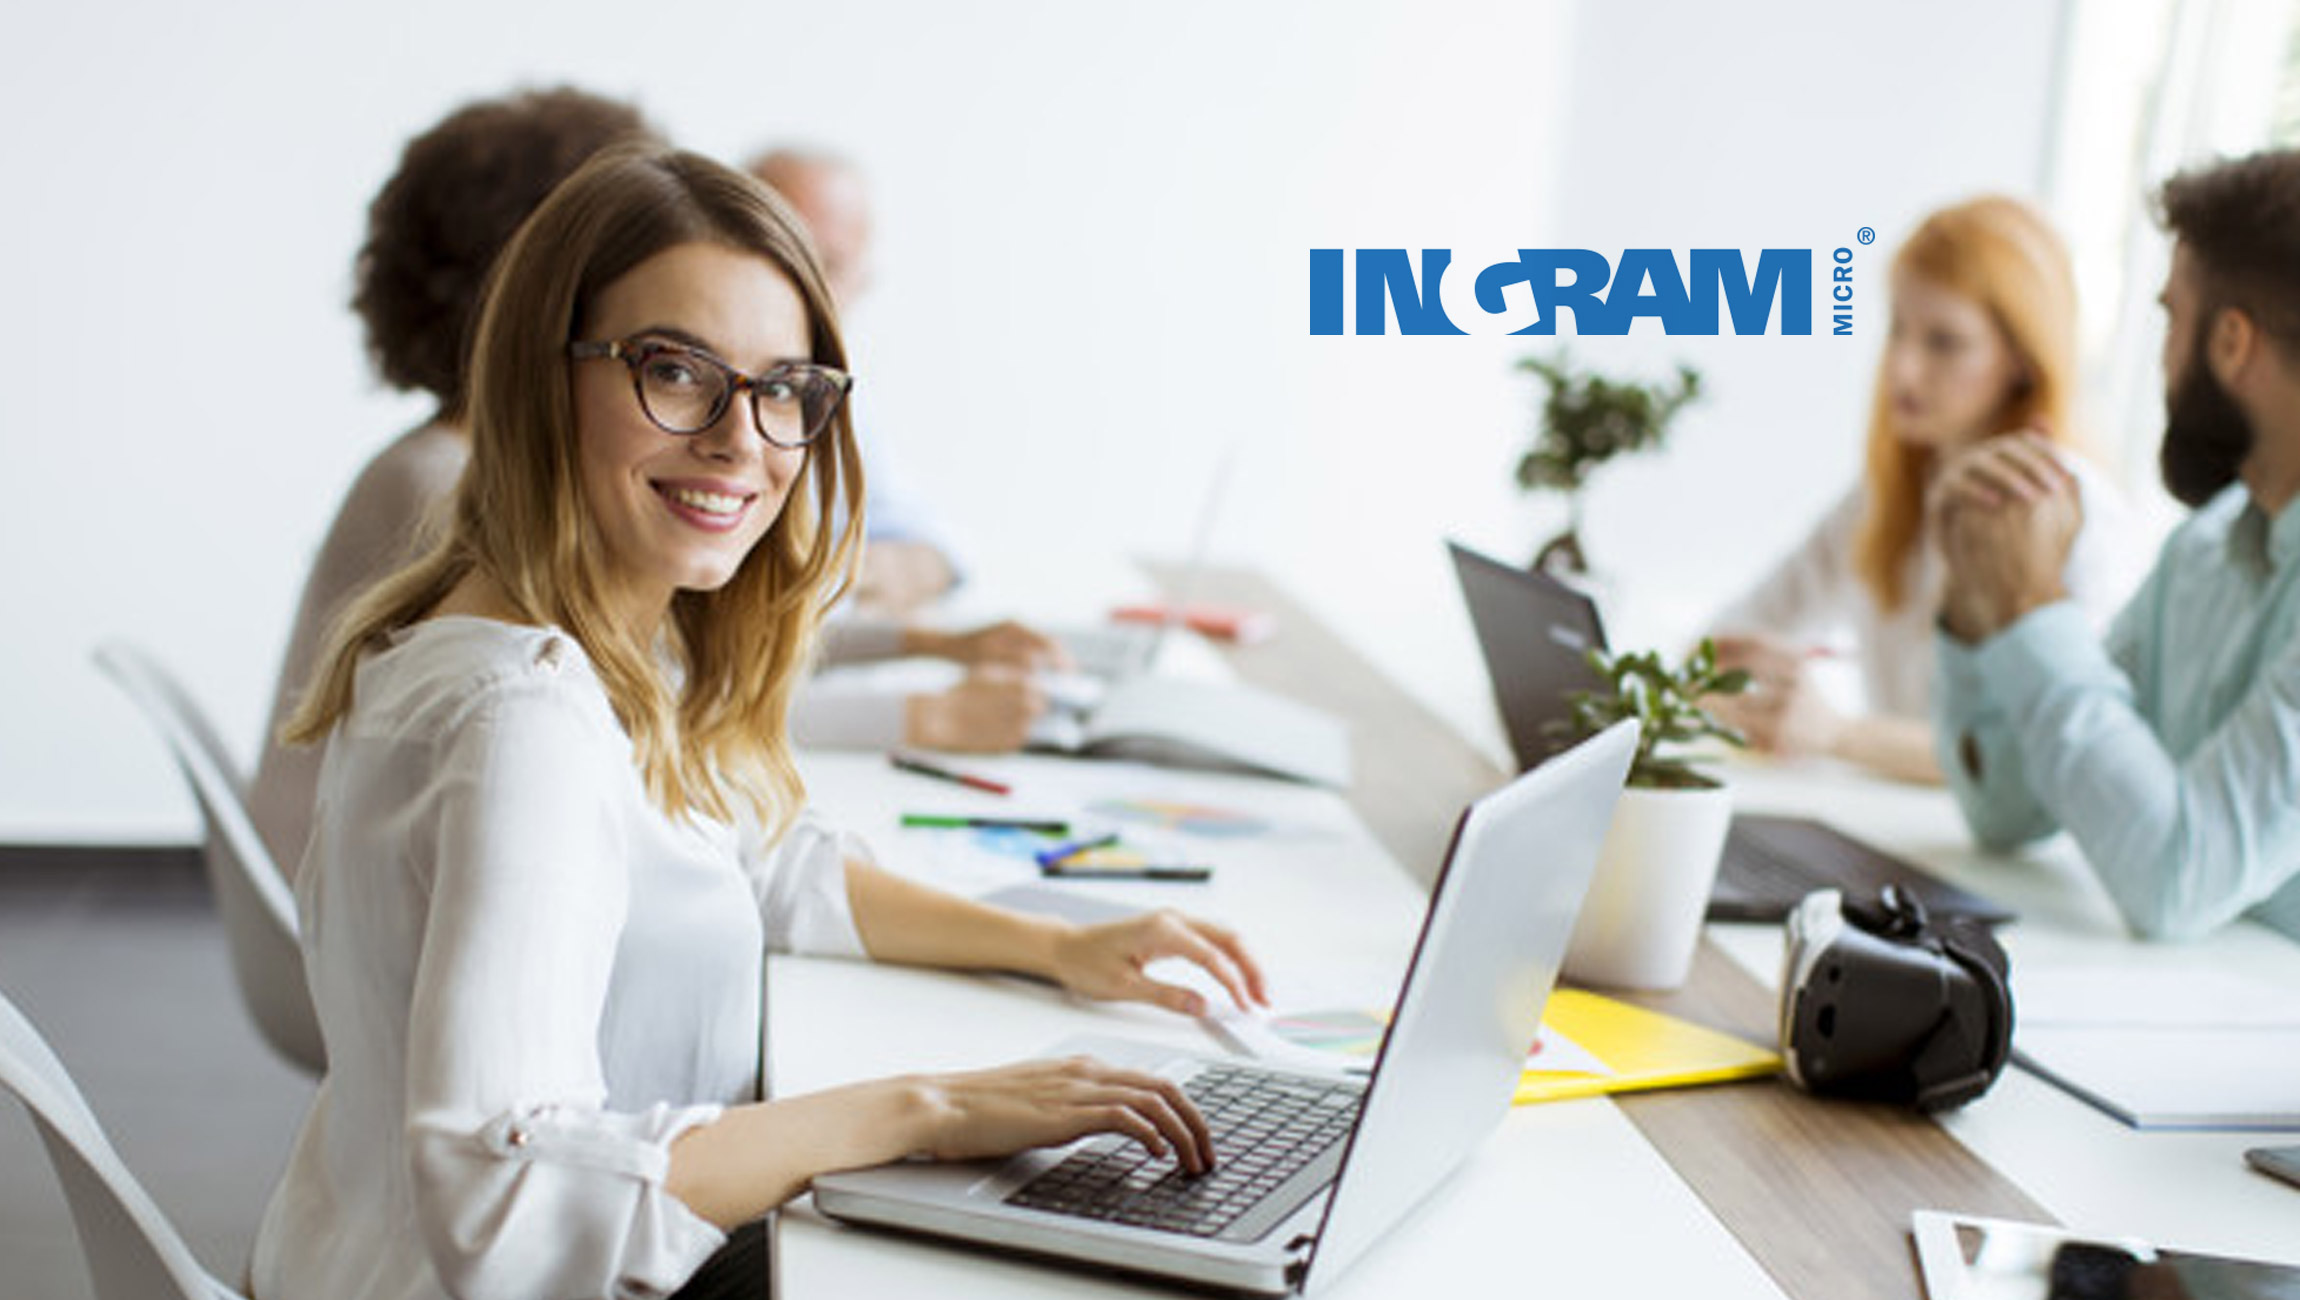 Ingram Micro Helps Accelerate Partner Success with Microsoft Azure and New Commerce Experience